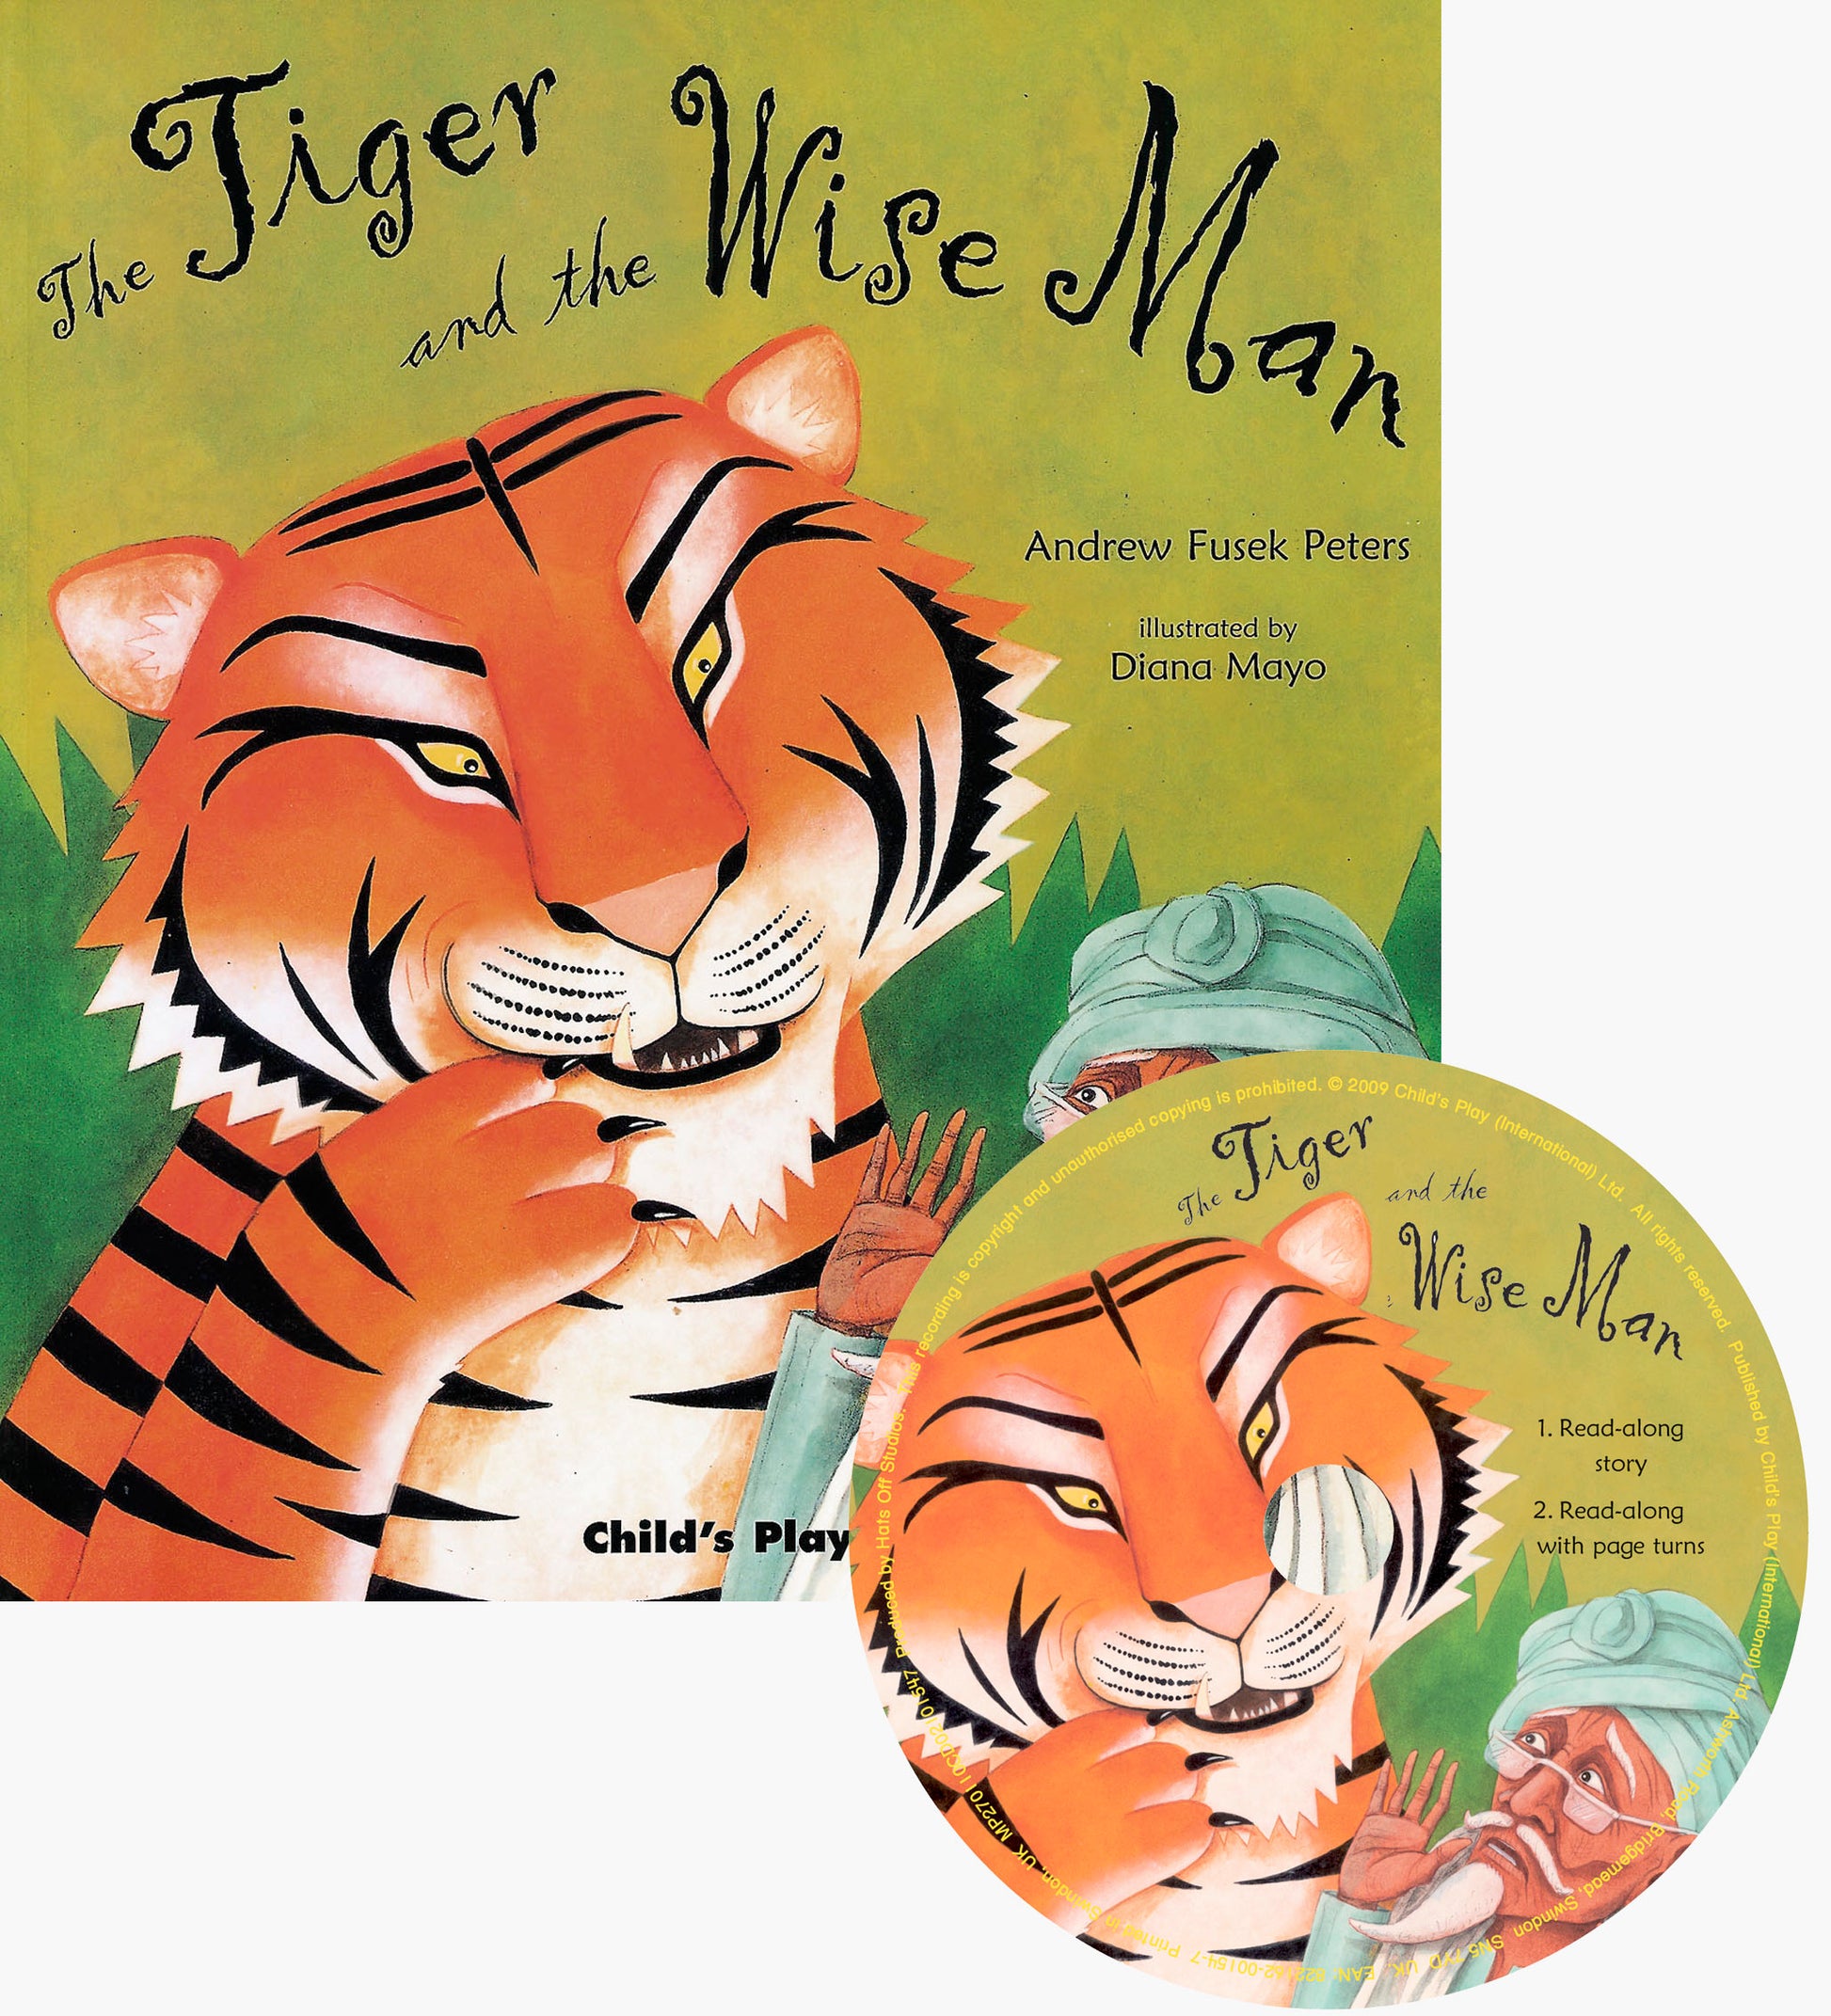 The Tiger and the Wise Man (Softcover and CD Edition)